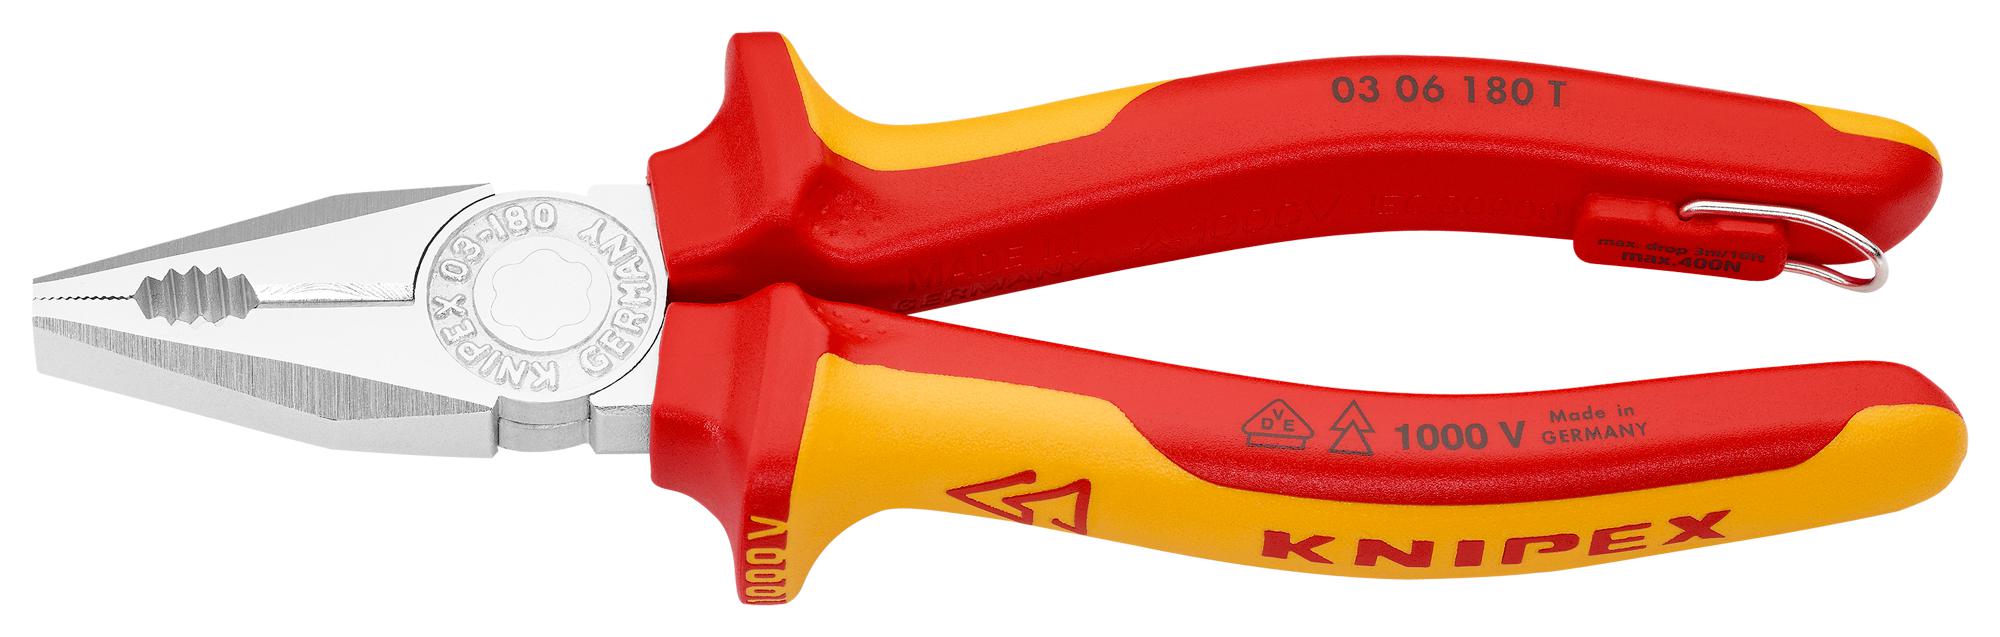 03 06 180 T COMBINATION PLIER, 180MM, 16MM2 KNIPEX